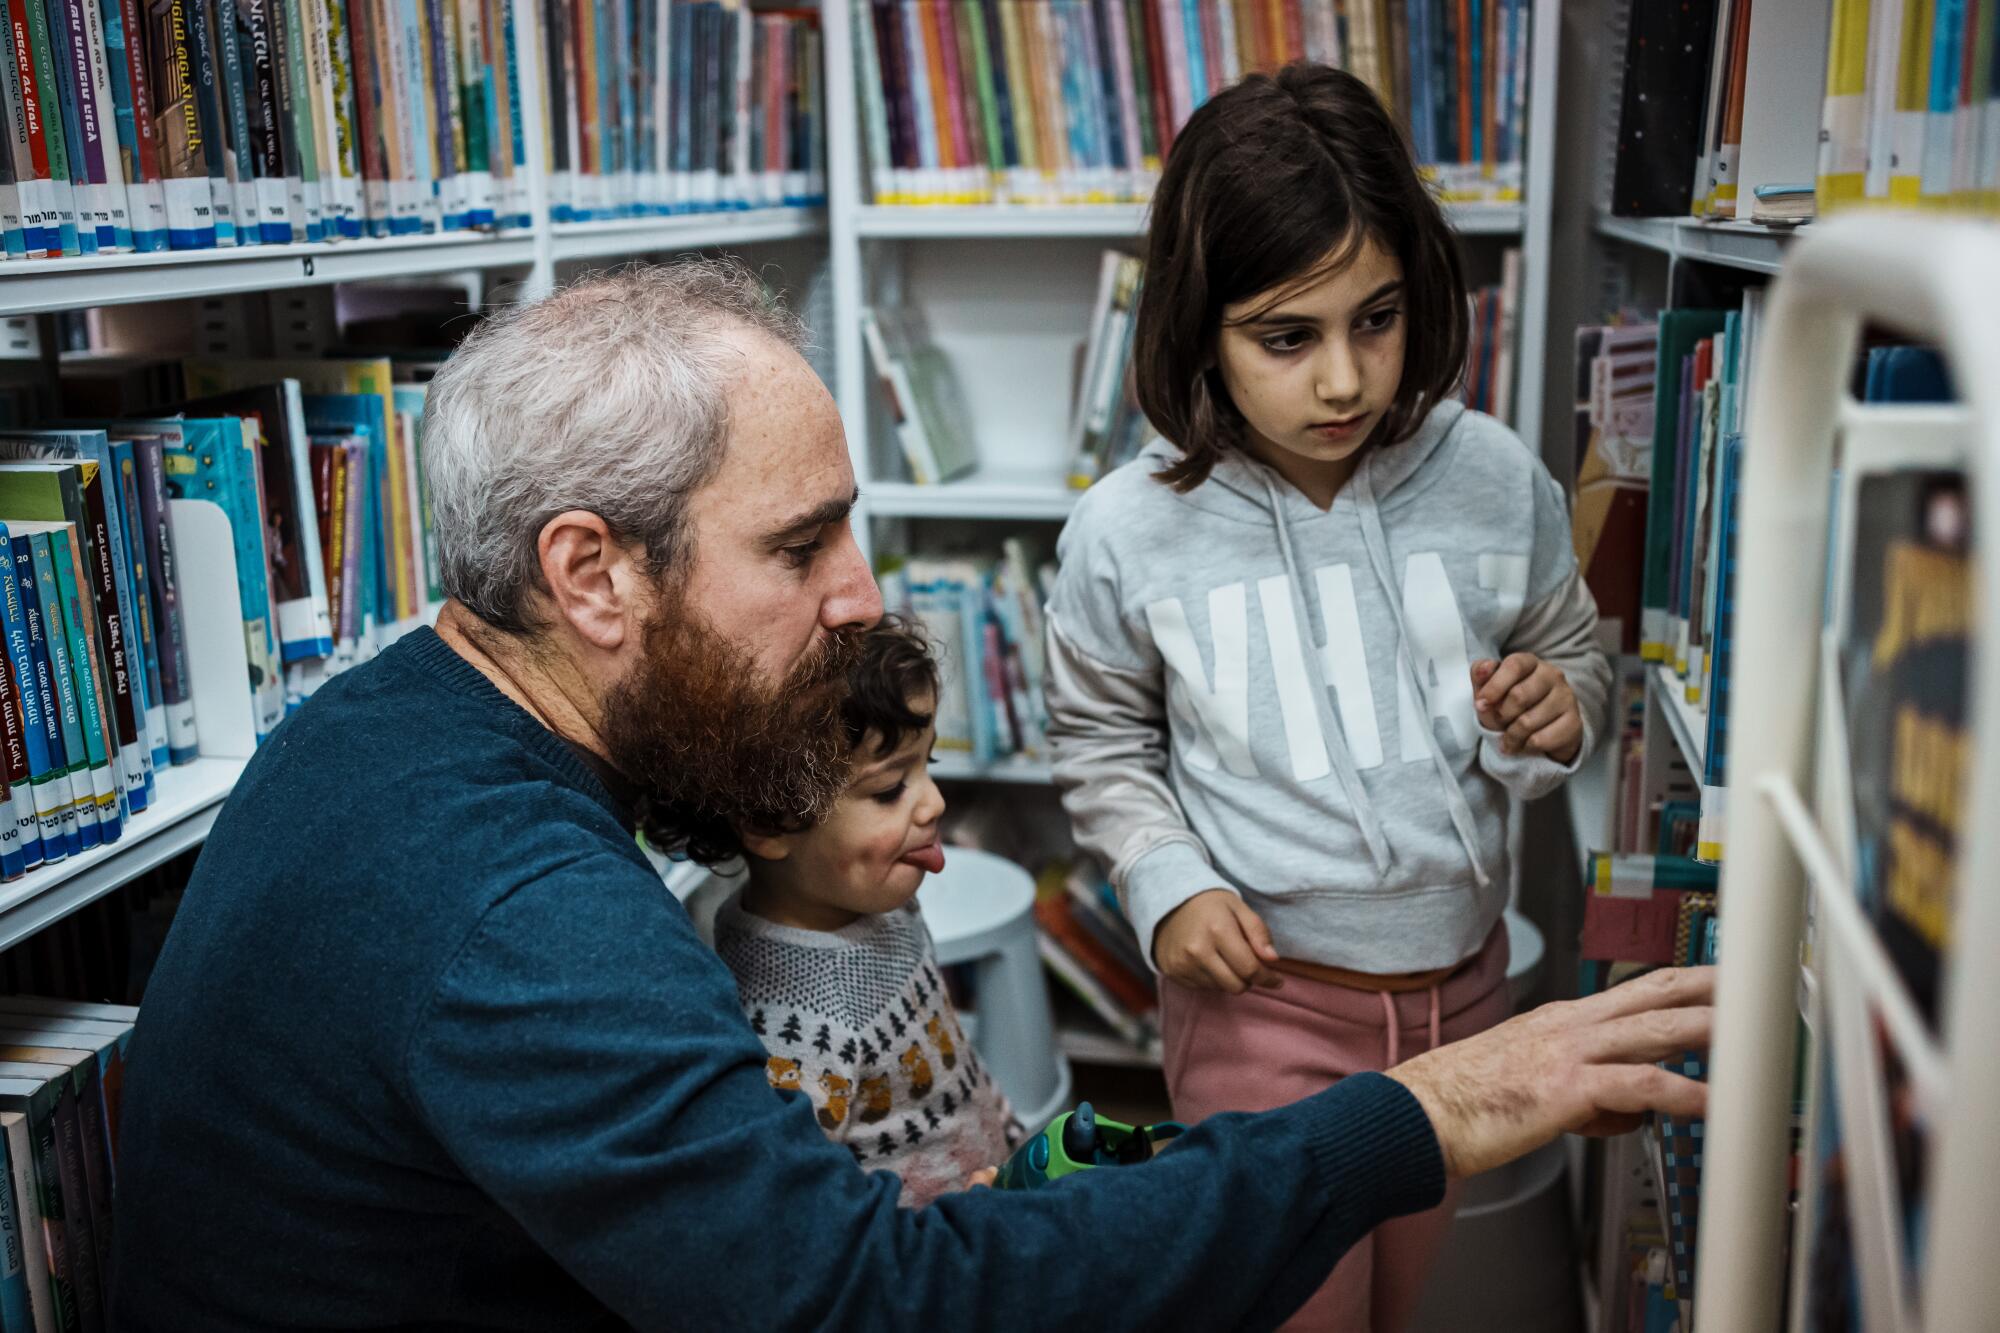 A man and two children look at books on shelves